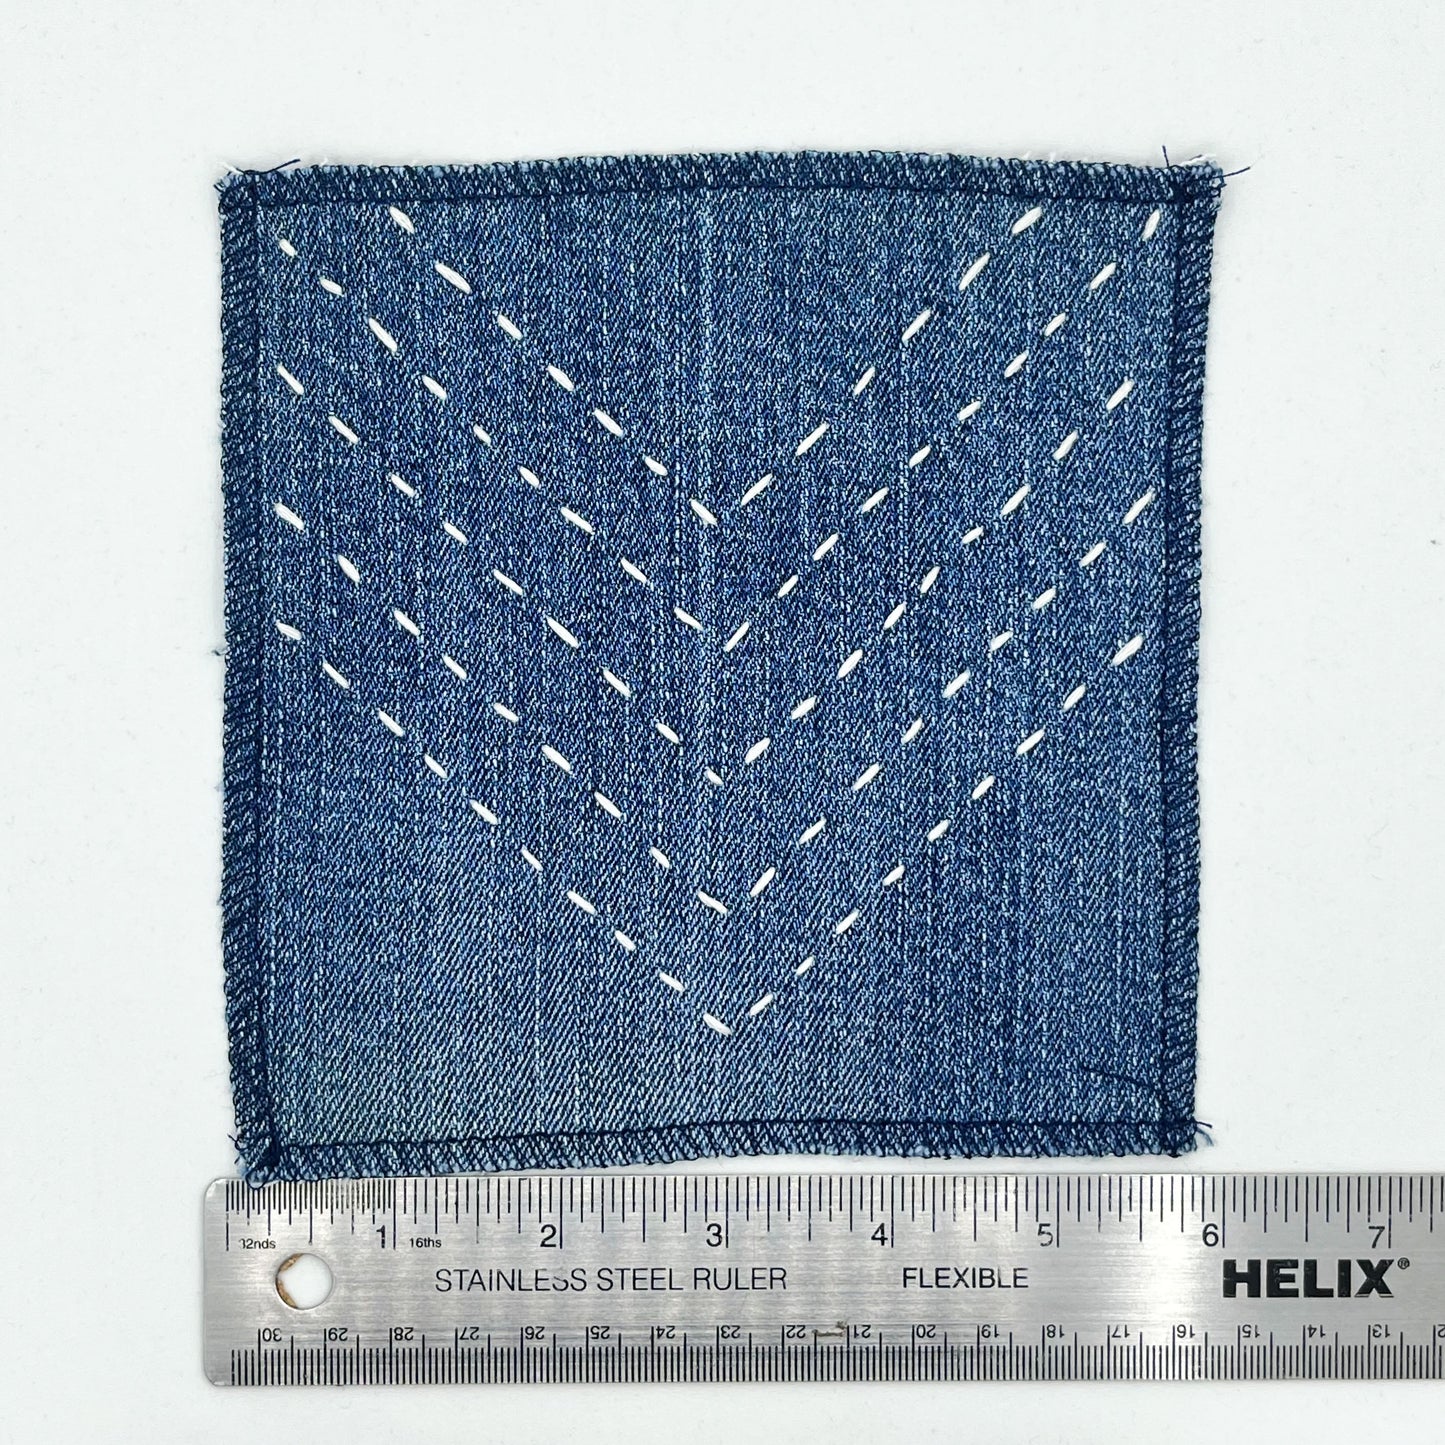 a square patch made out of denim, handstitched with rows of ivory running stitches in a chevron pattern, with overlocked edges, next to a metal ruler showing a width of 6 inches, on a white background